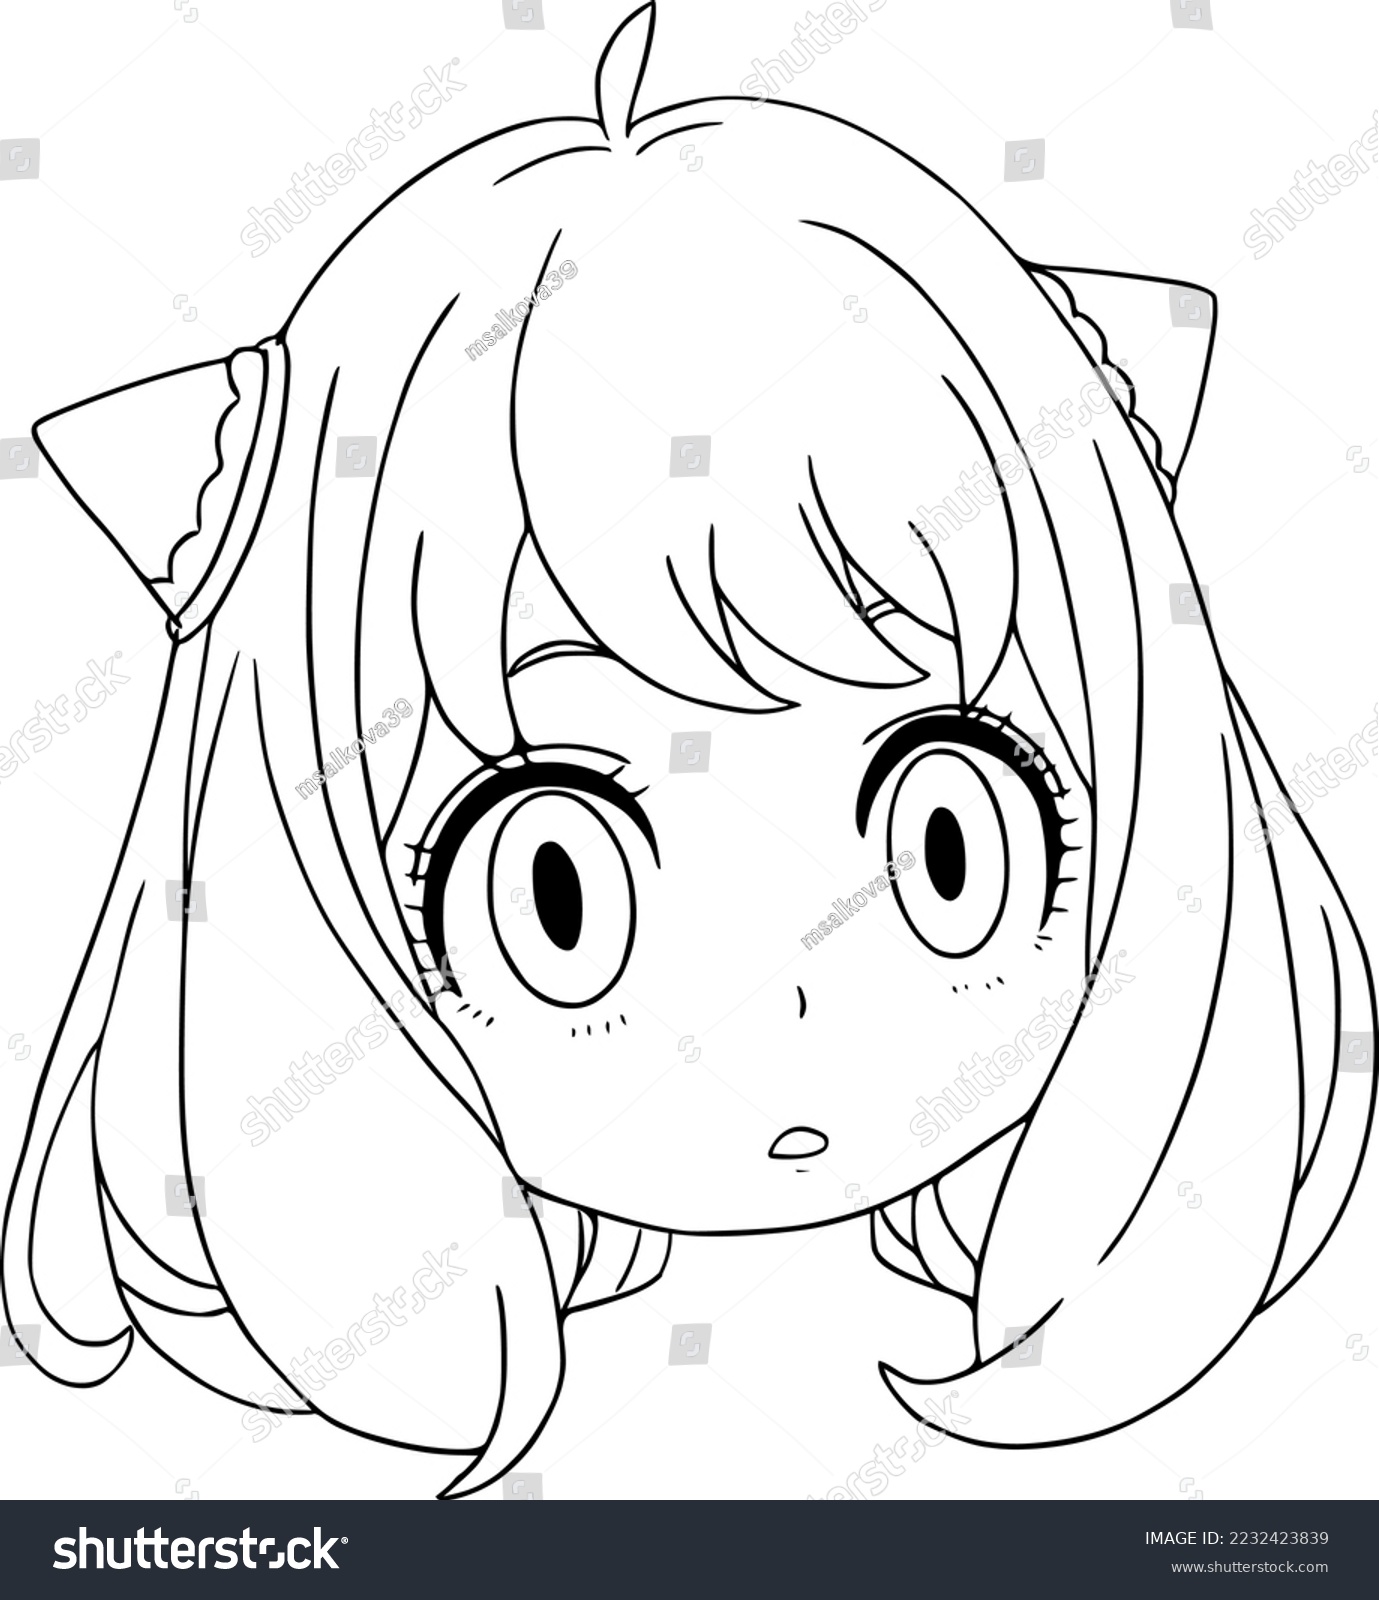 SVG of Surprised girl with wide open eyes, the girl has ears and lush hair, no body only head, sketch, doodle, coloring book svg